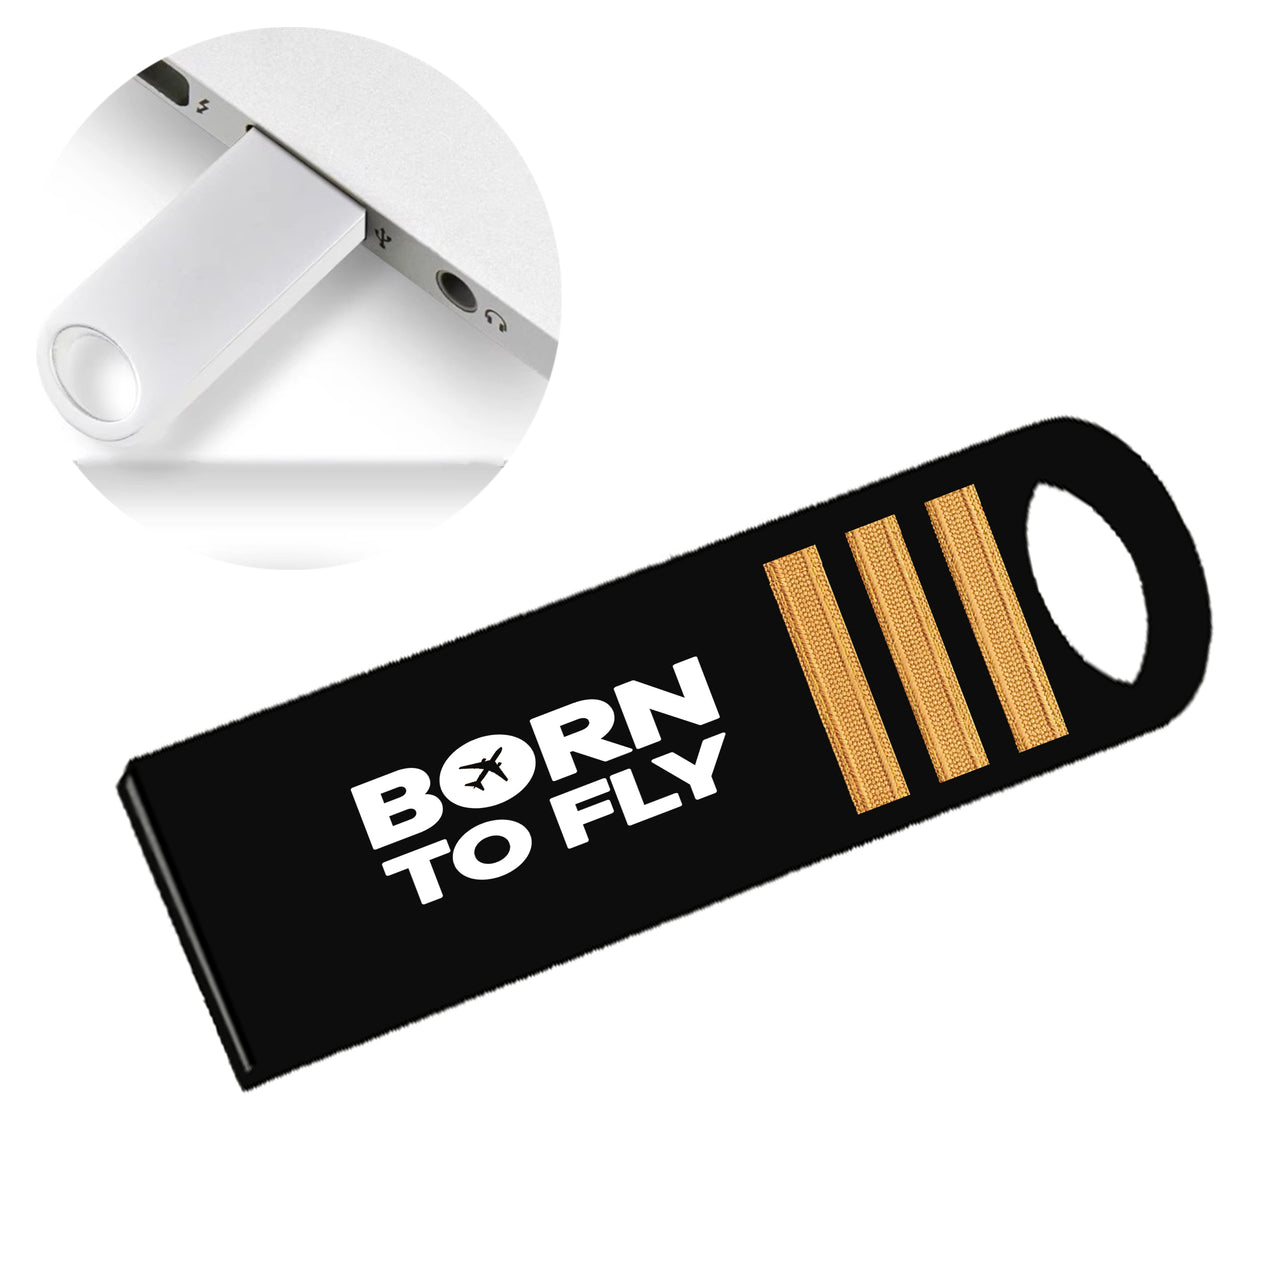 Born to Fly & Pilot Epaulettes (4,3,2 Lines) Designed Waterproof USB Devices